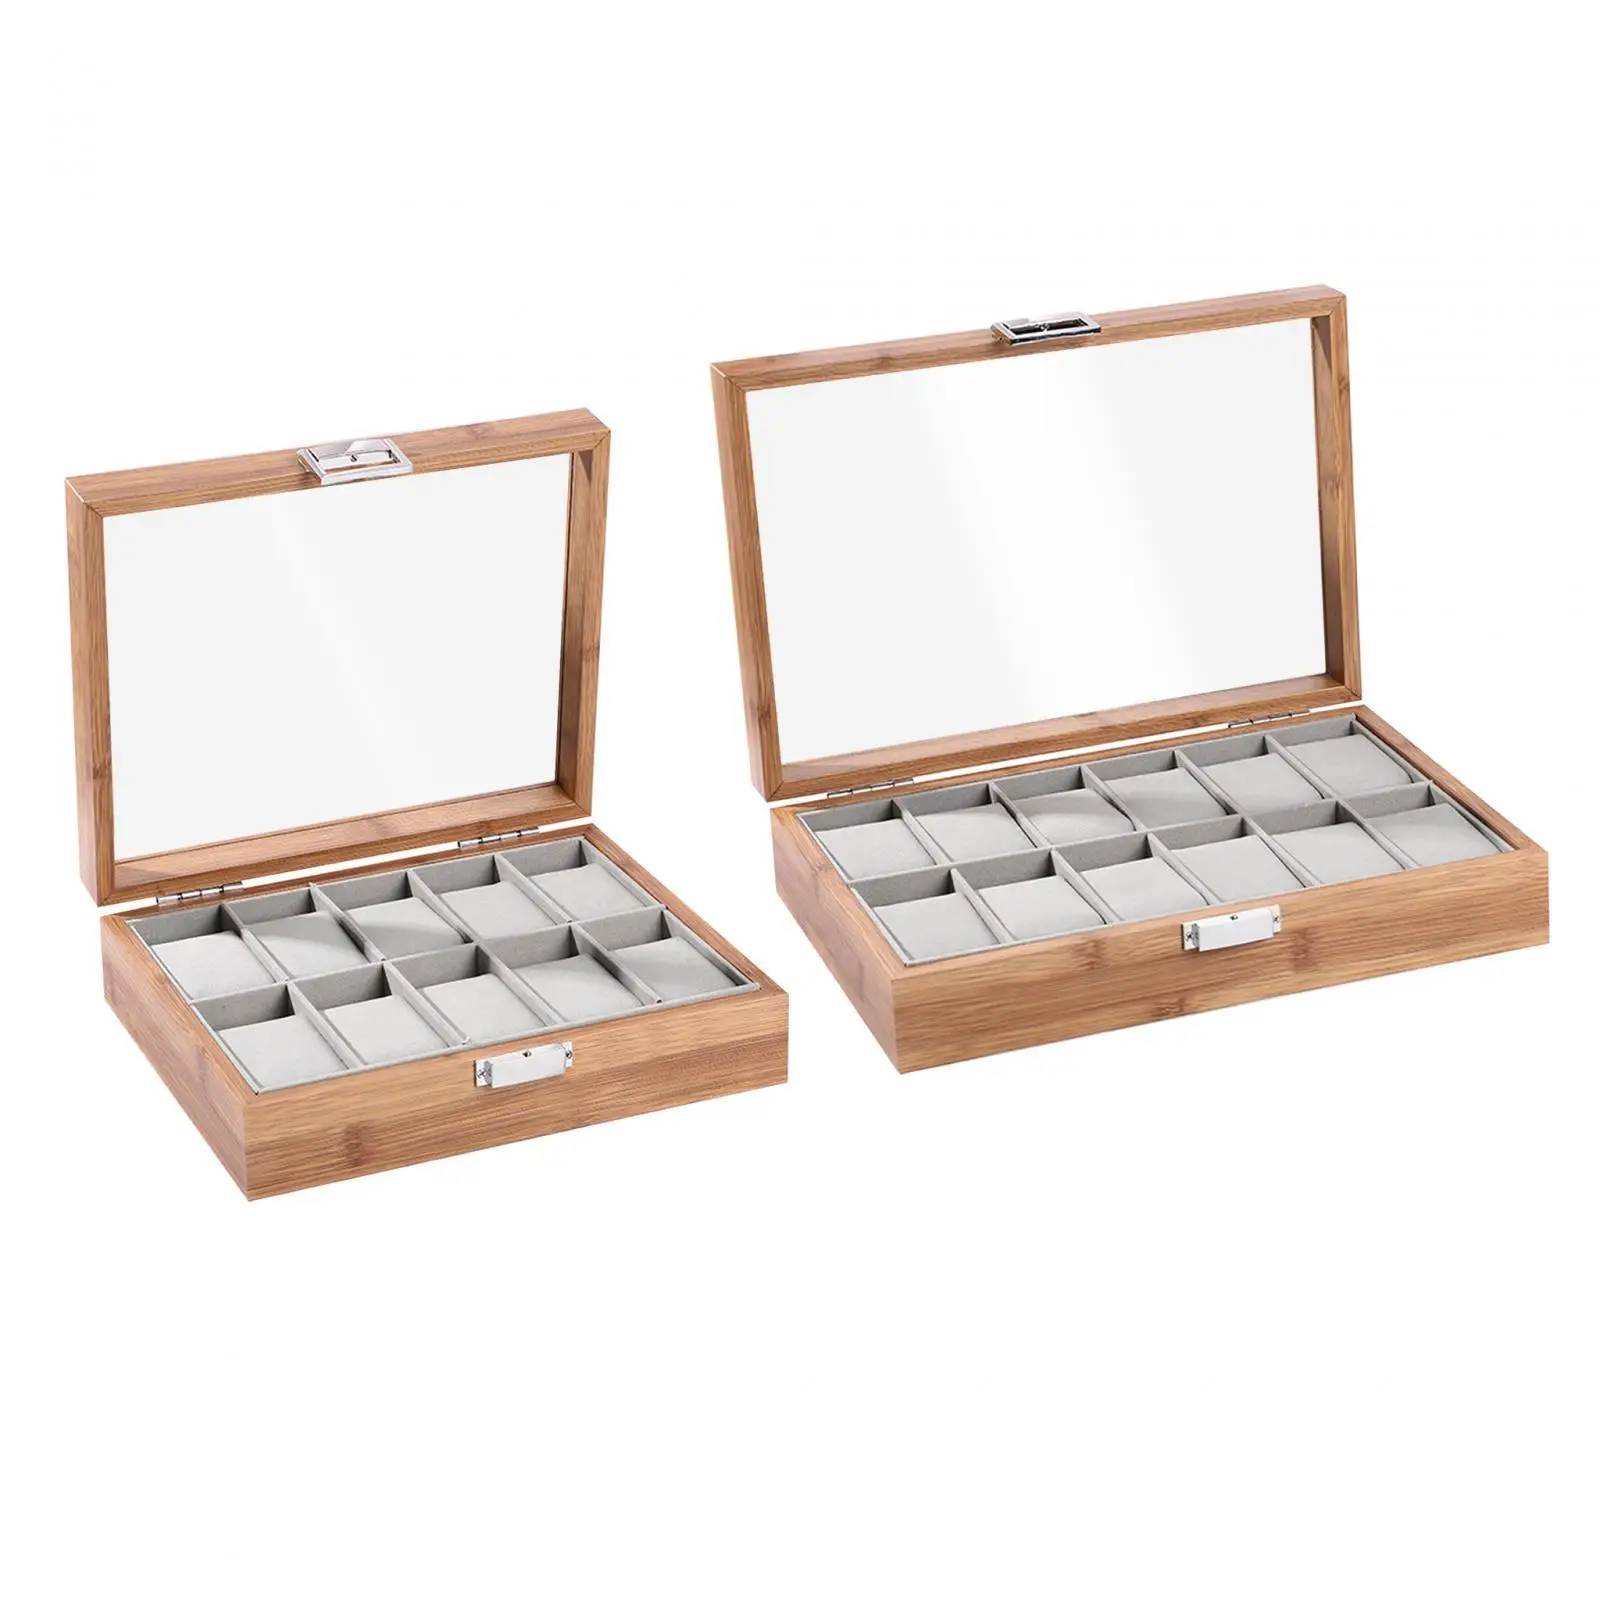 Watch Storage Box Lockable Jewelry Display Case for Home Decor Watches Necklace Bracelet Earrings Men and Women Table Dresser